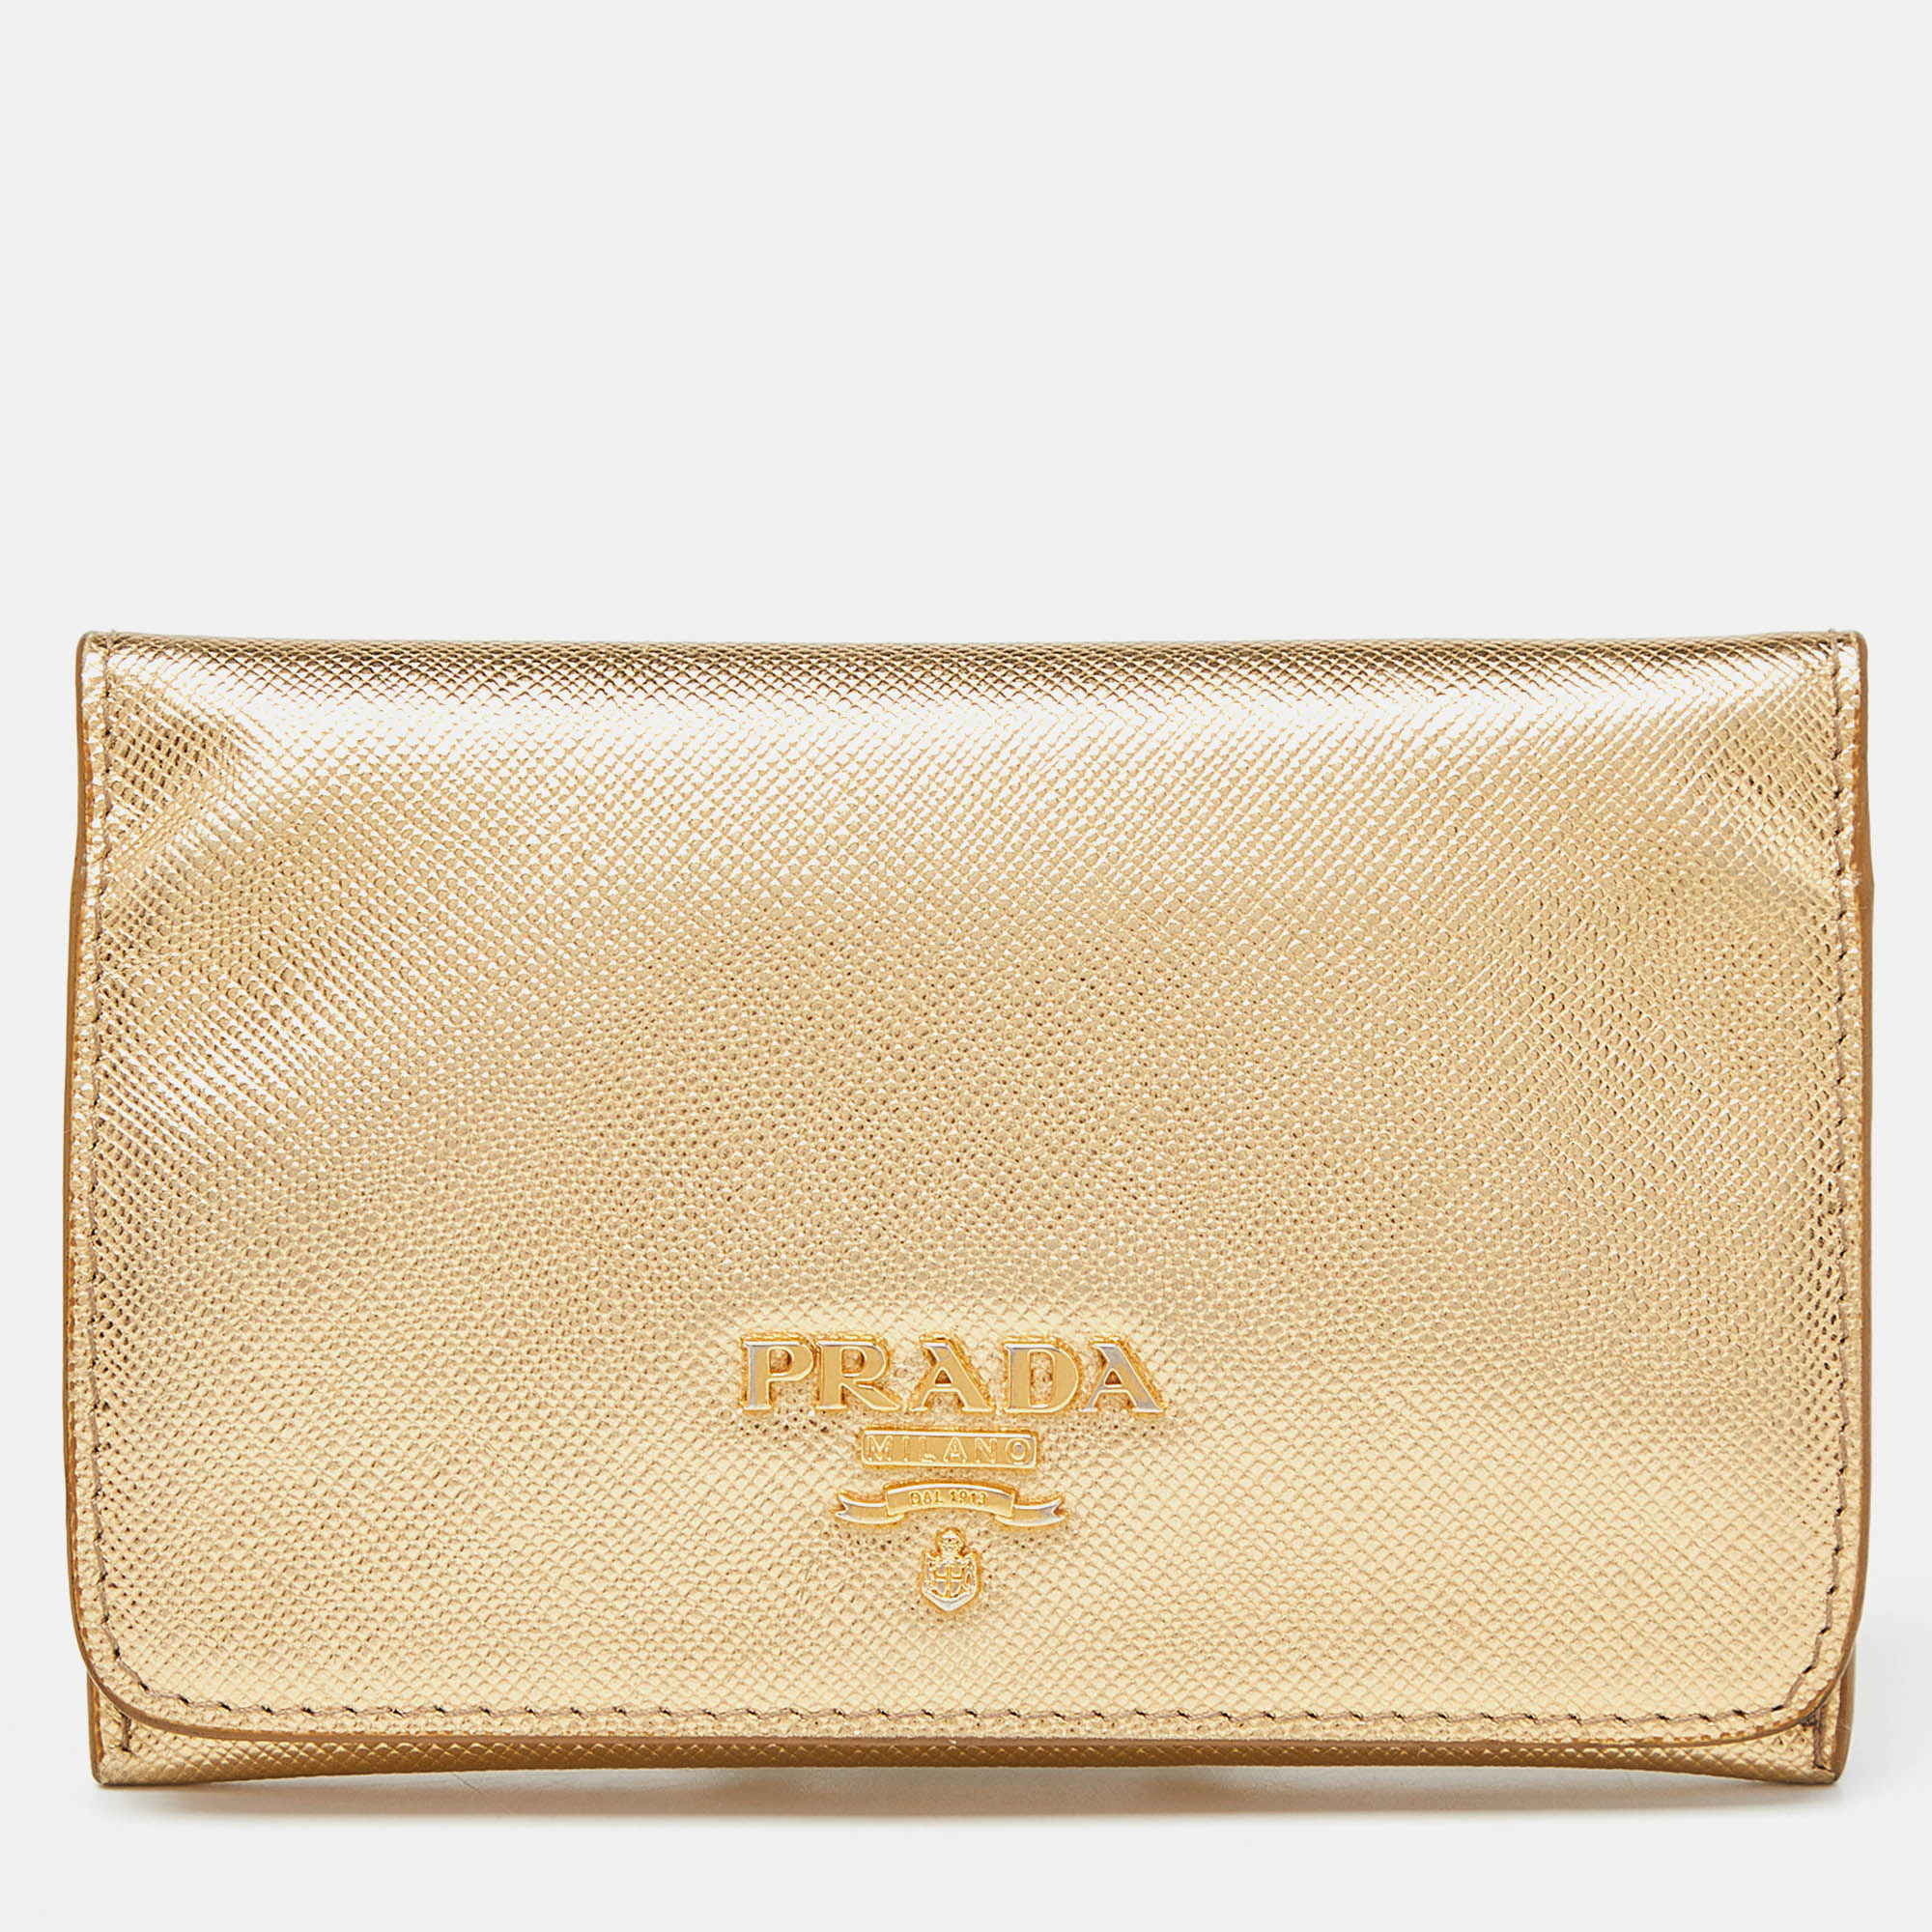 Pre-owned Prada Gold Saffiano Leather Business Card Case